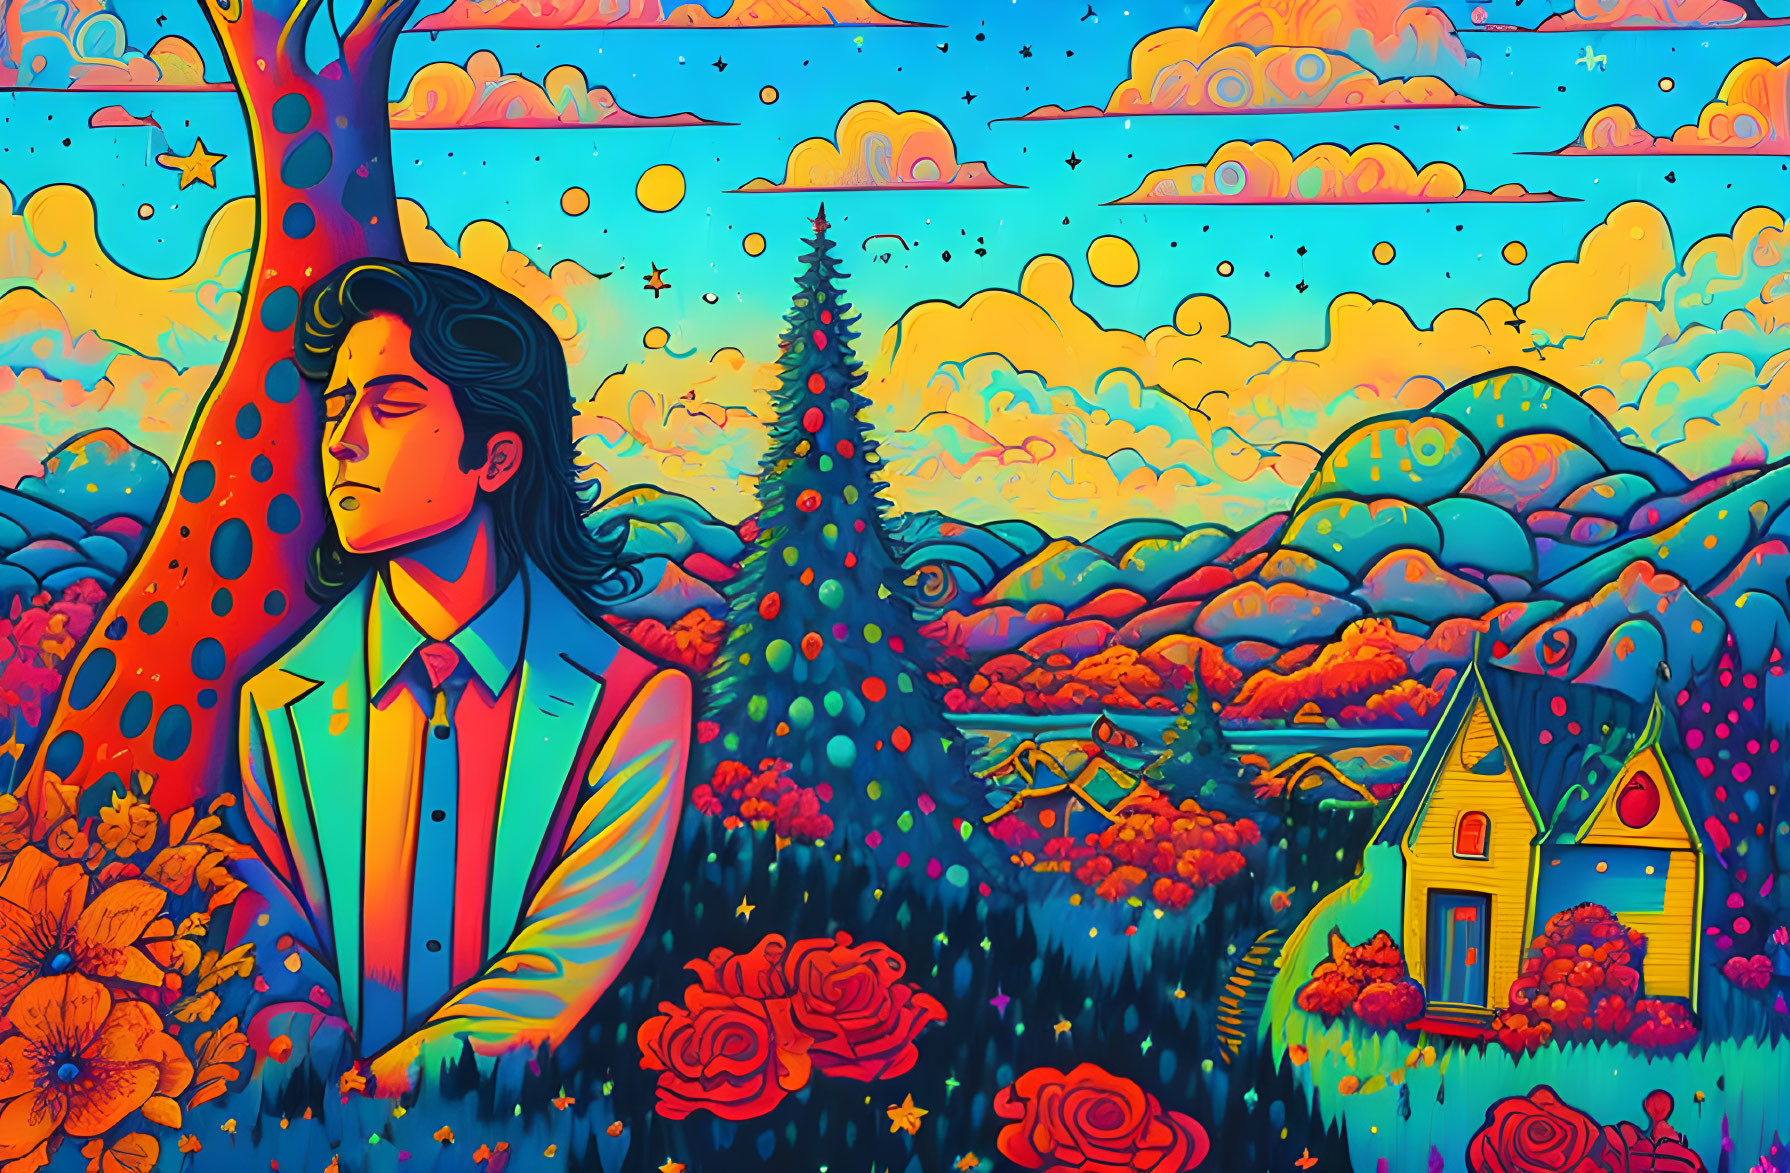 Colorful Psychedelic Illustration of Person in Surreal Landscape